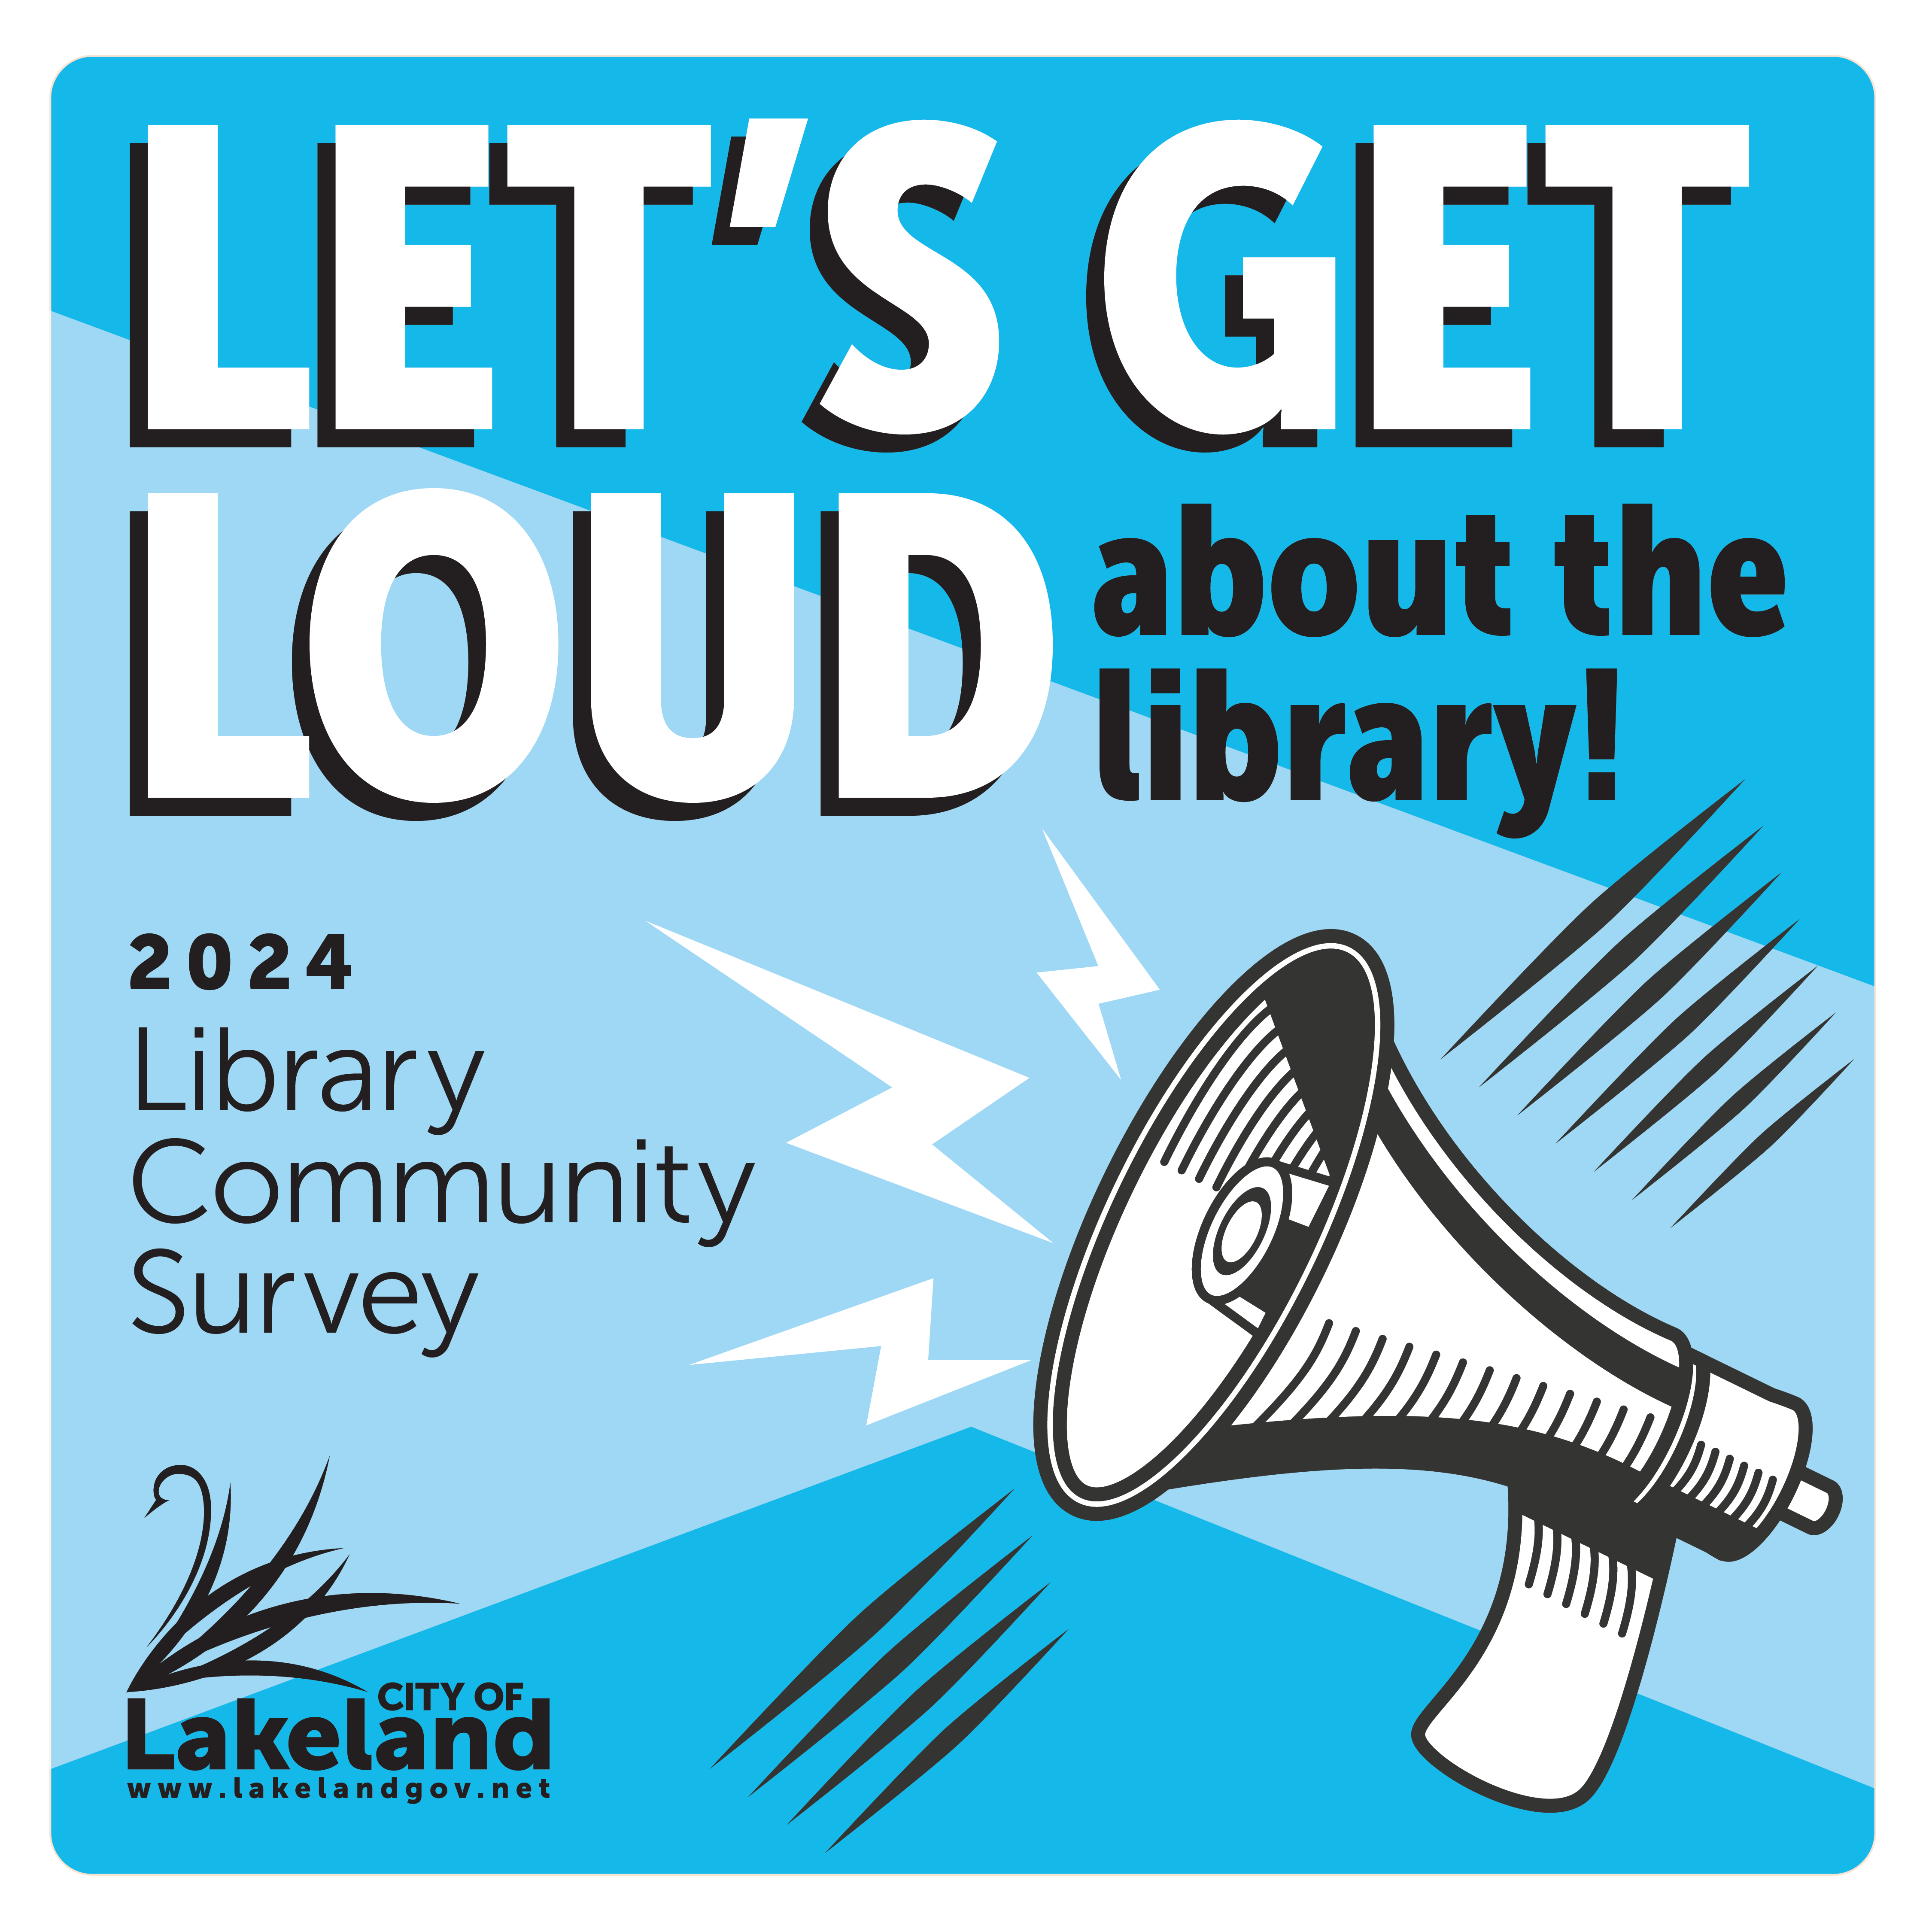 Megaphone on blue background with text "Let's Get Loud about the Library! 2024 Library Community Survey" and City logo